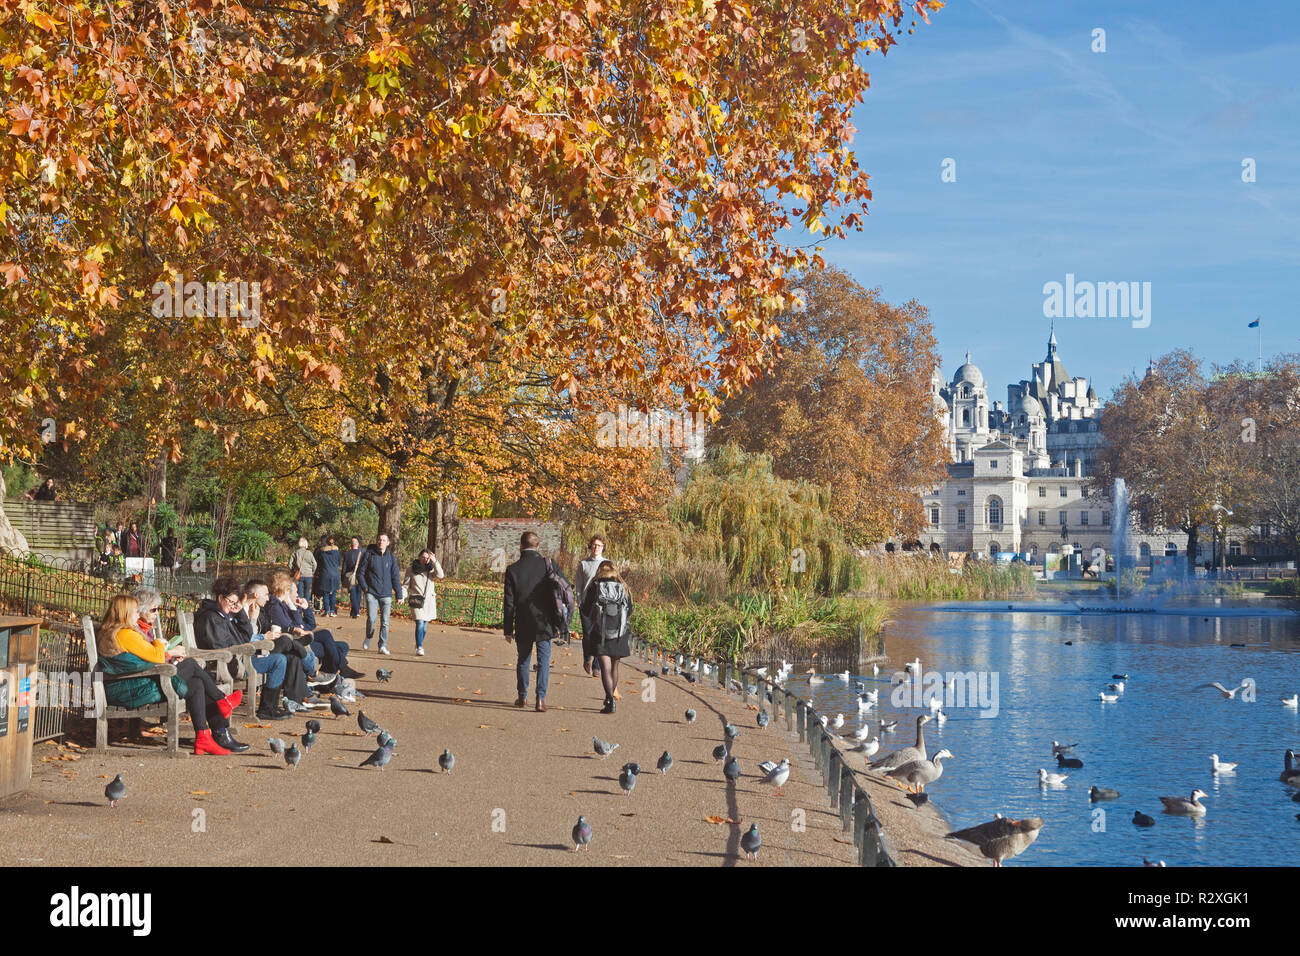 London, Westminster.   The Scene by the lake in St James's Park on a warm autumn day in November. Stock Photo